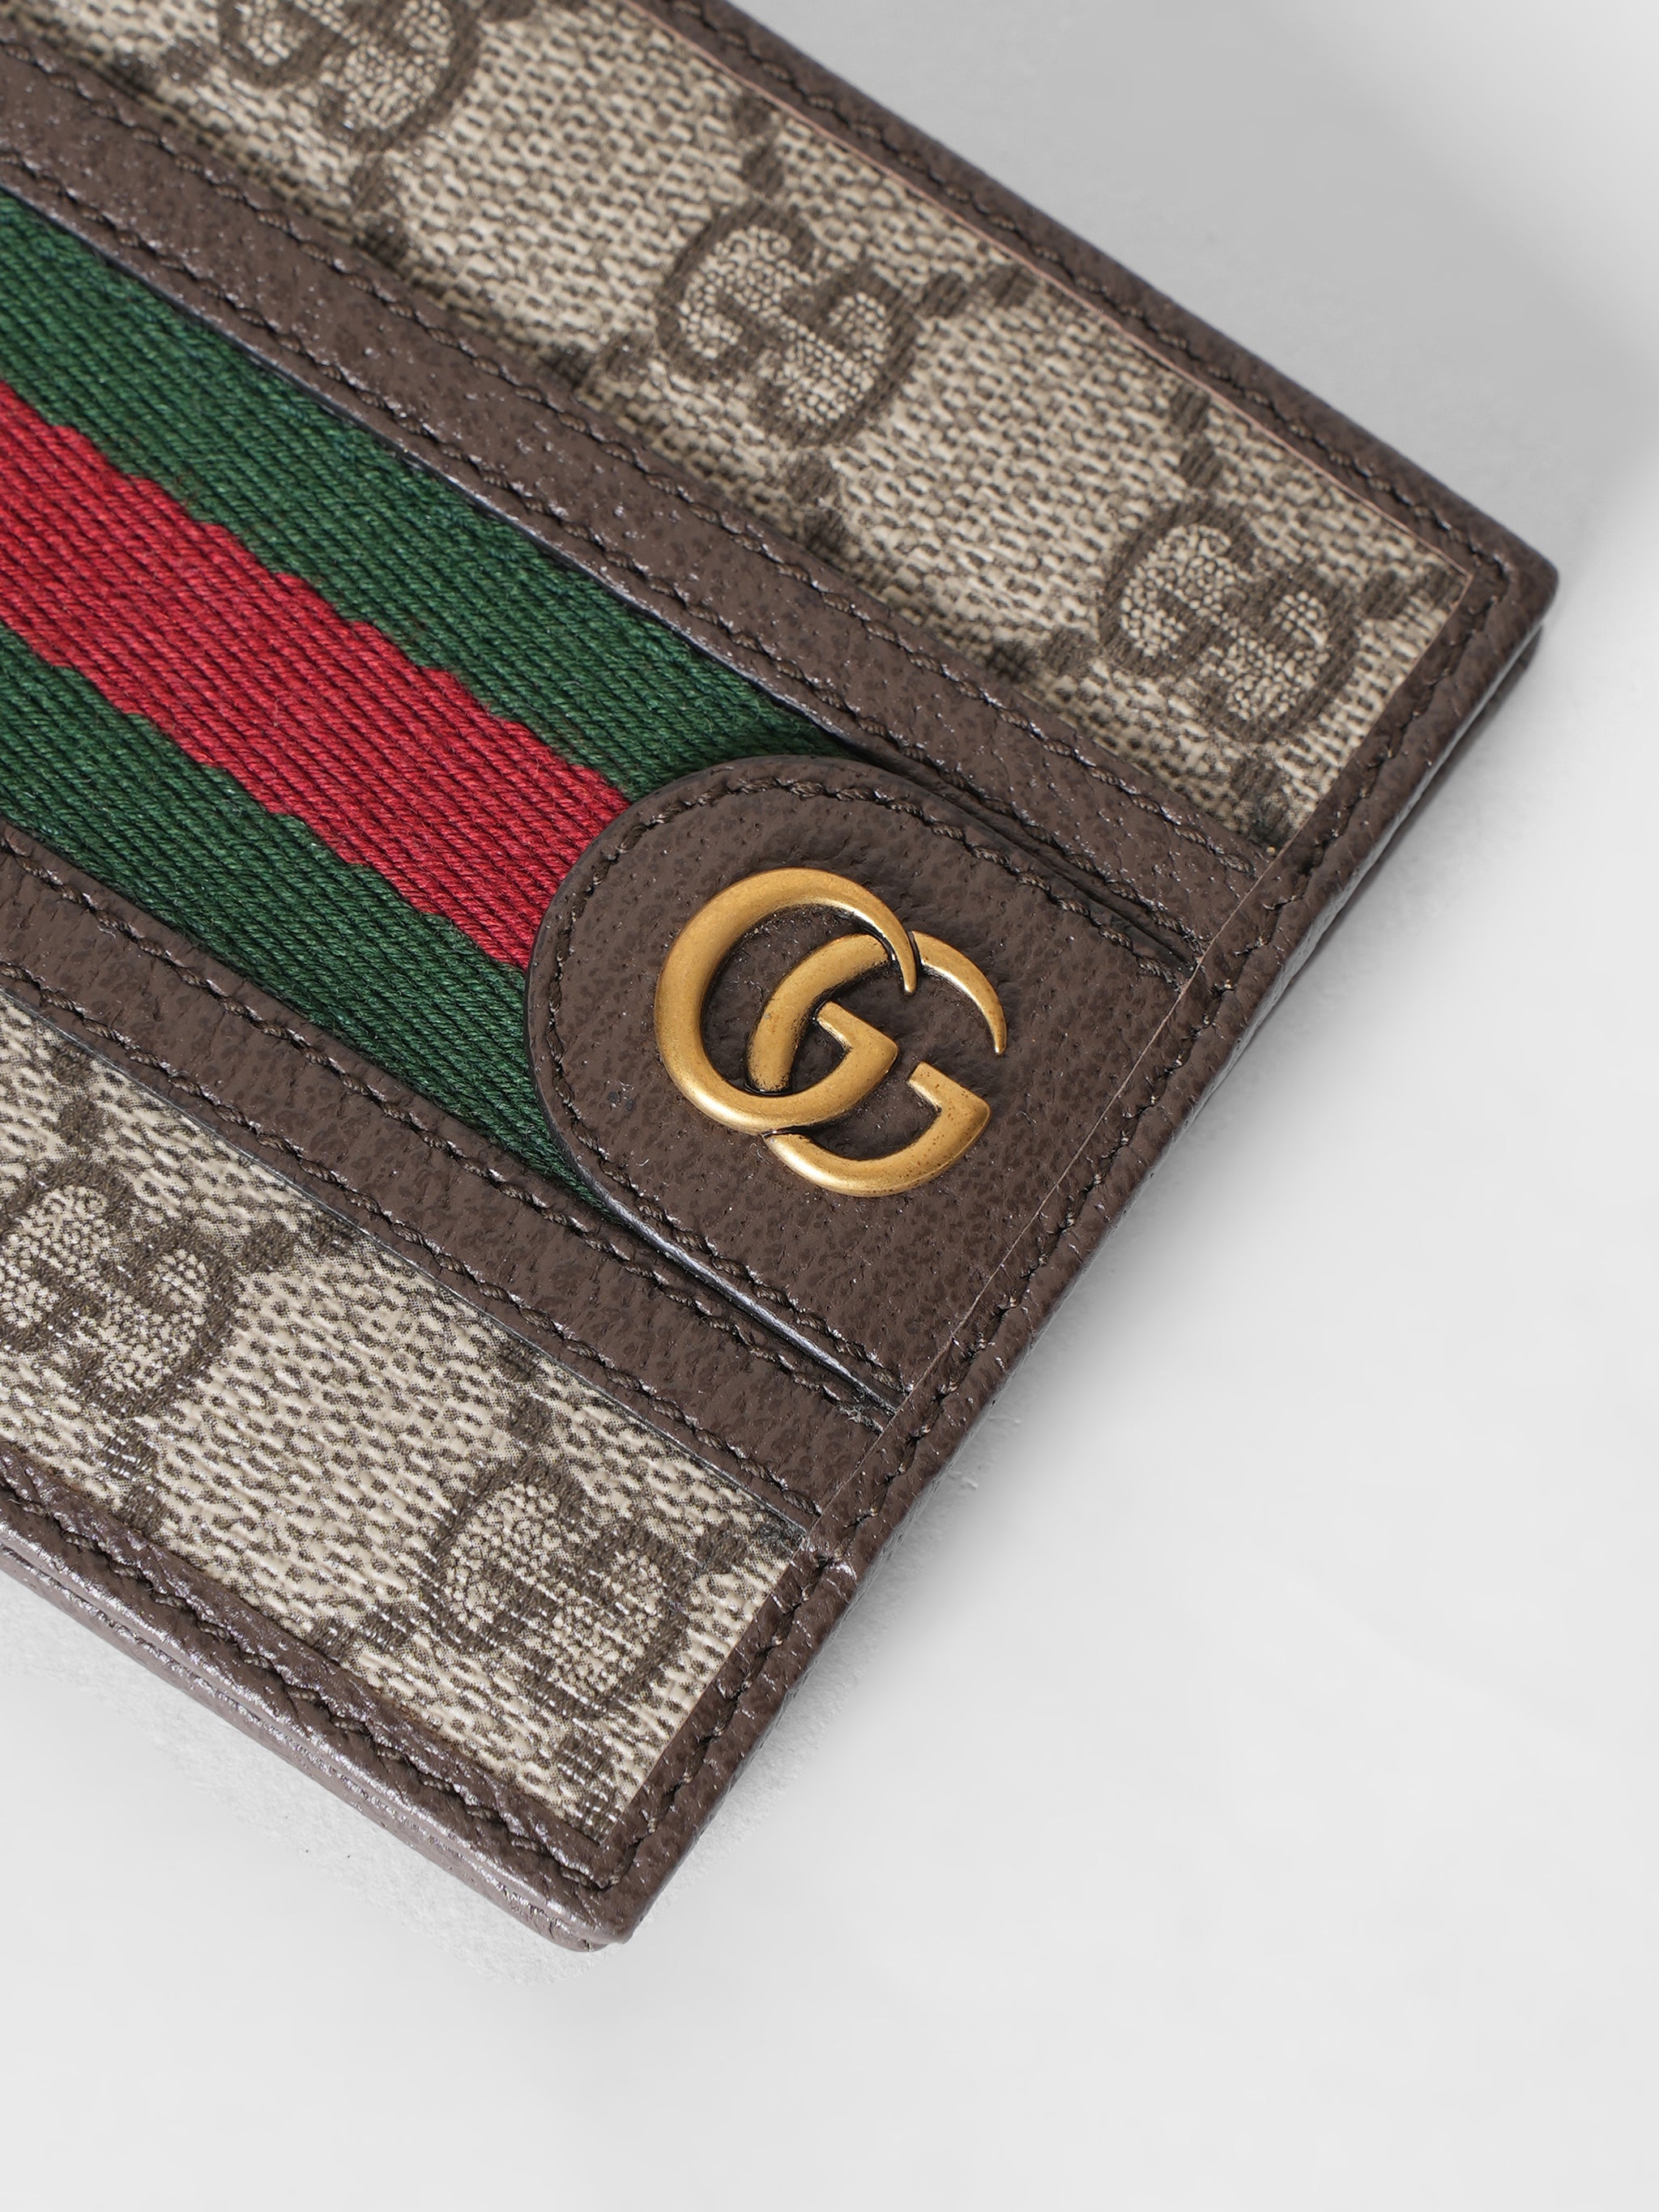 New Gucci Ophidia GG Wallet